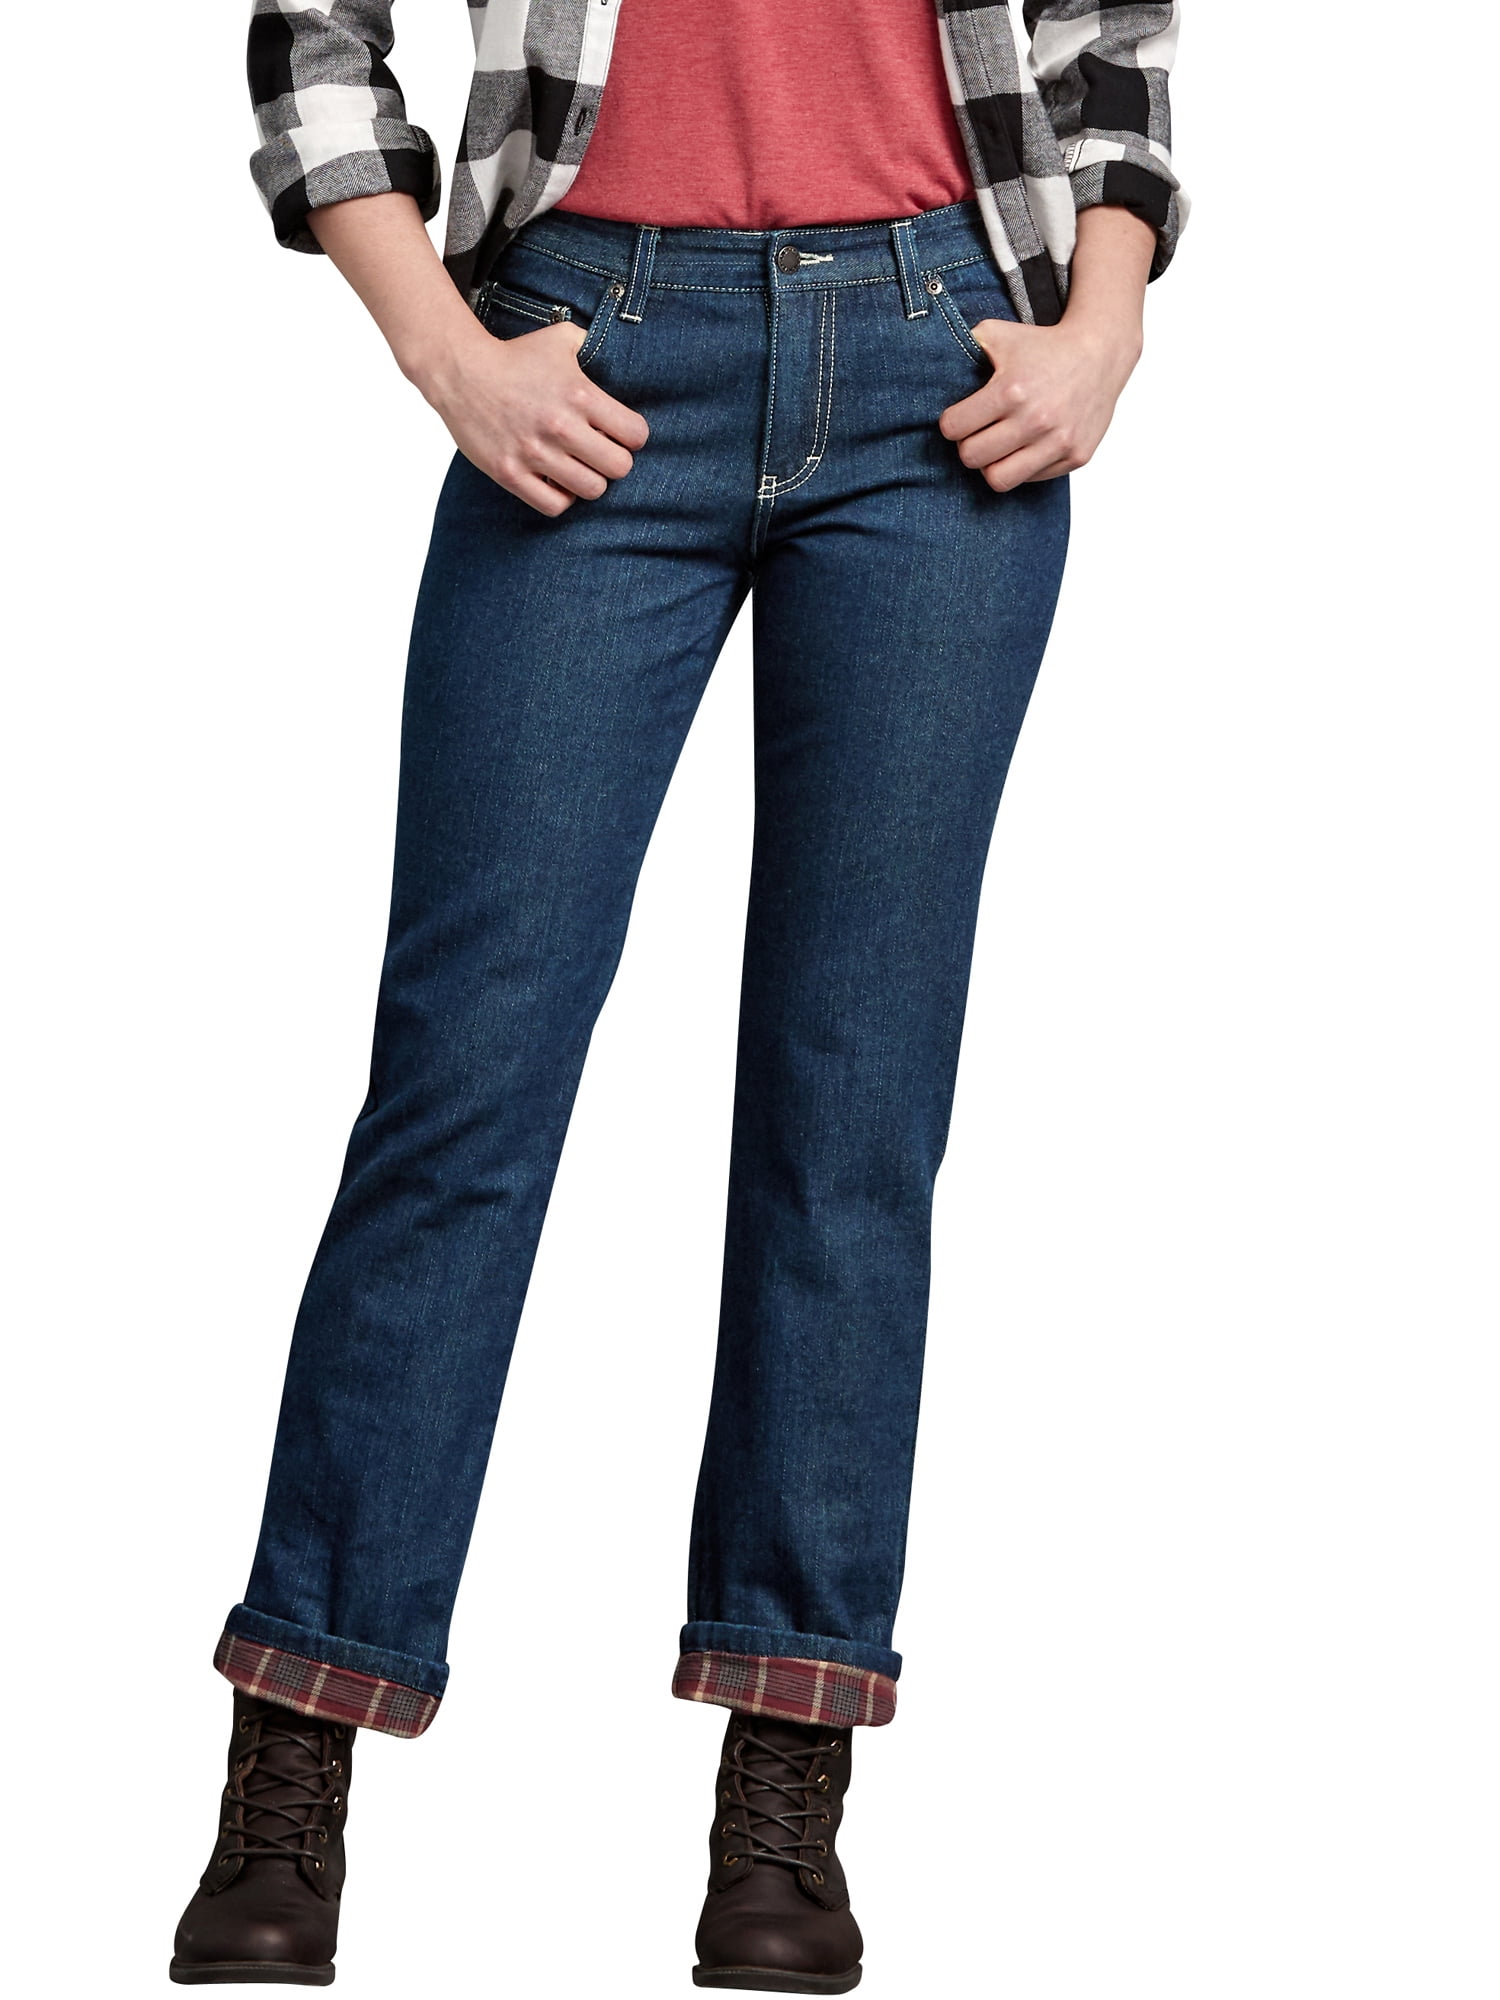 levi's flannel lined jeans womens